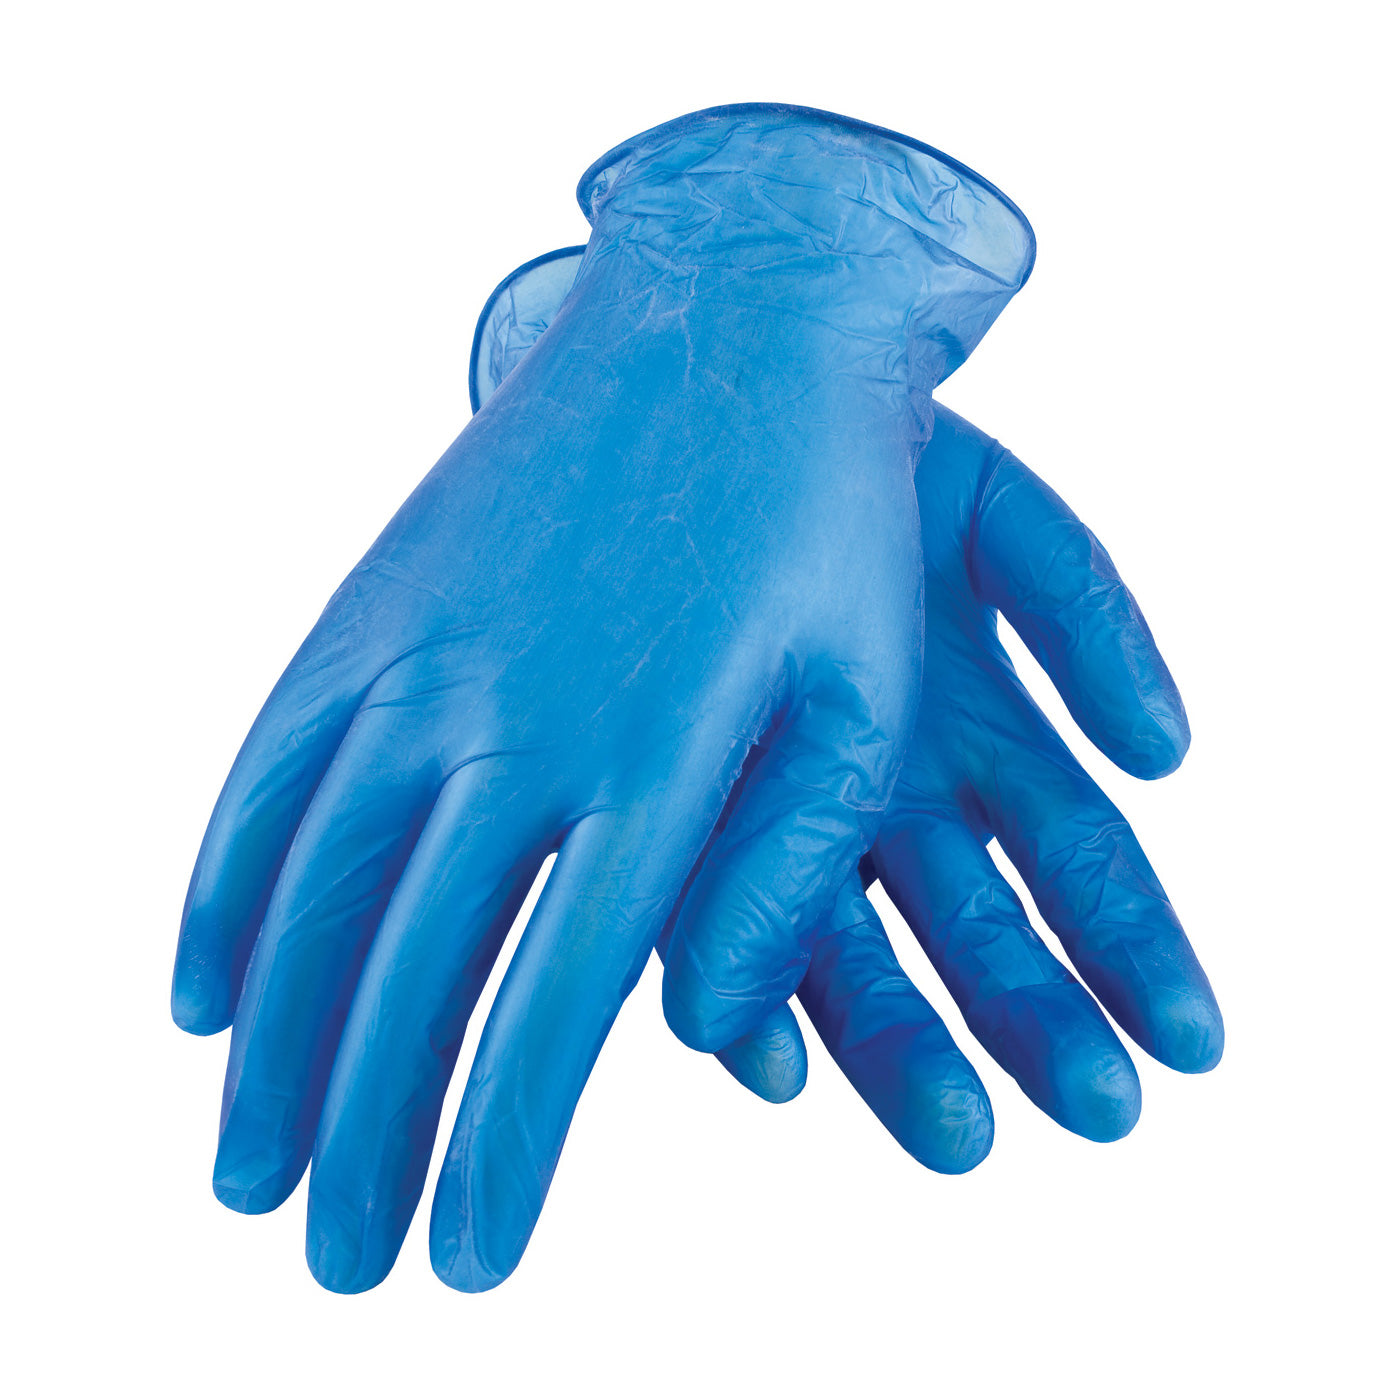 Ambi-dex 64-V77B/S Industrial Grade Disposable Vinyl Glove, Powdered - 5 Mil- Discontinued- Limited Quantities available